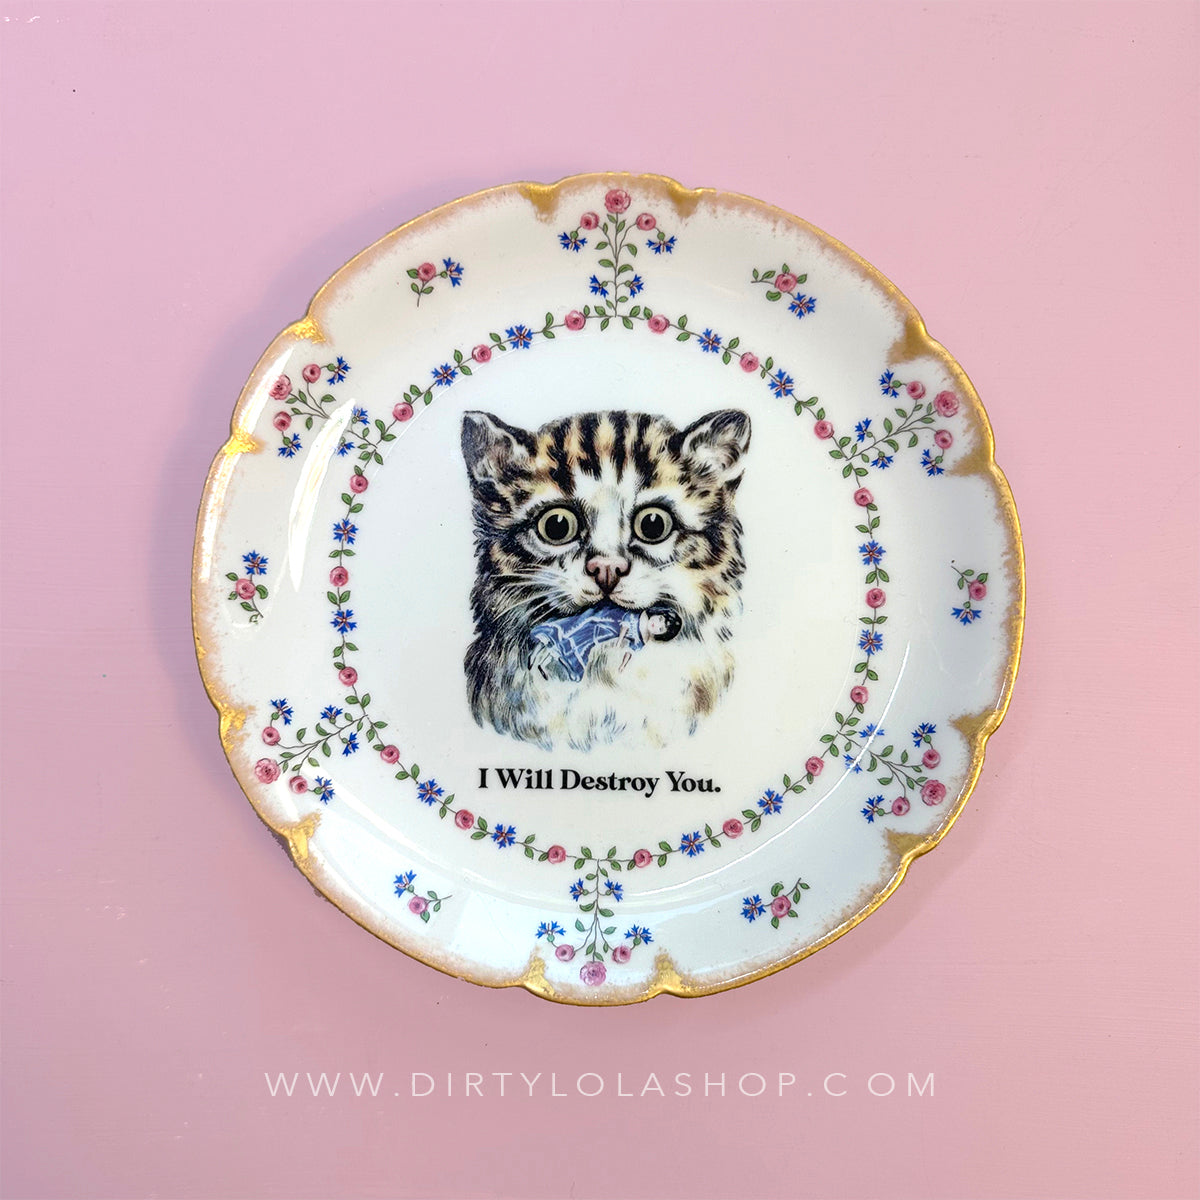 Vintage Art Plate - Cat plate - "I will Destroy You"